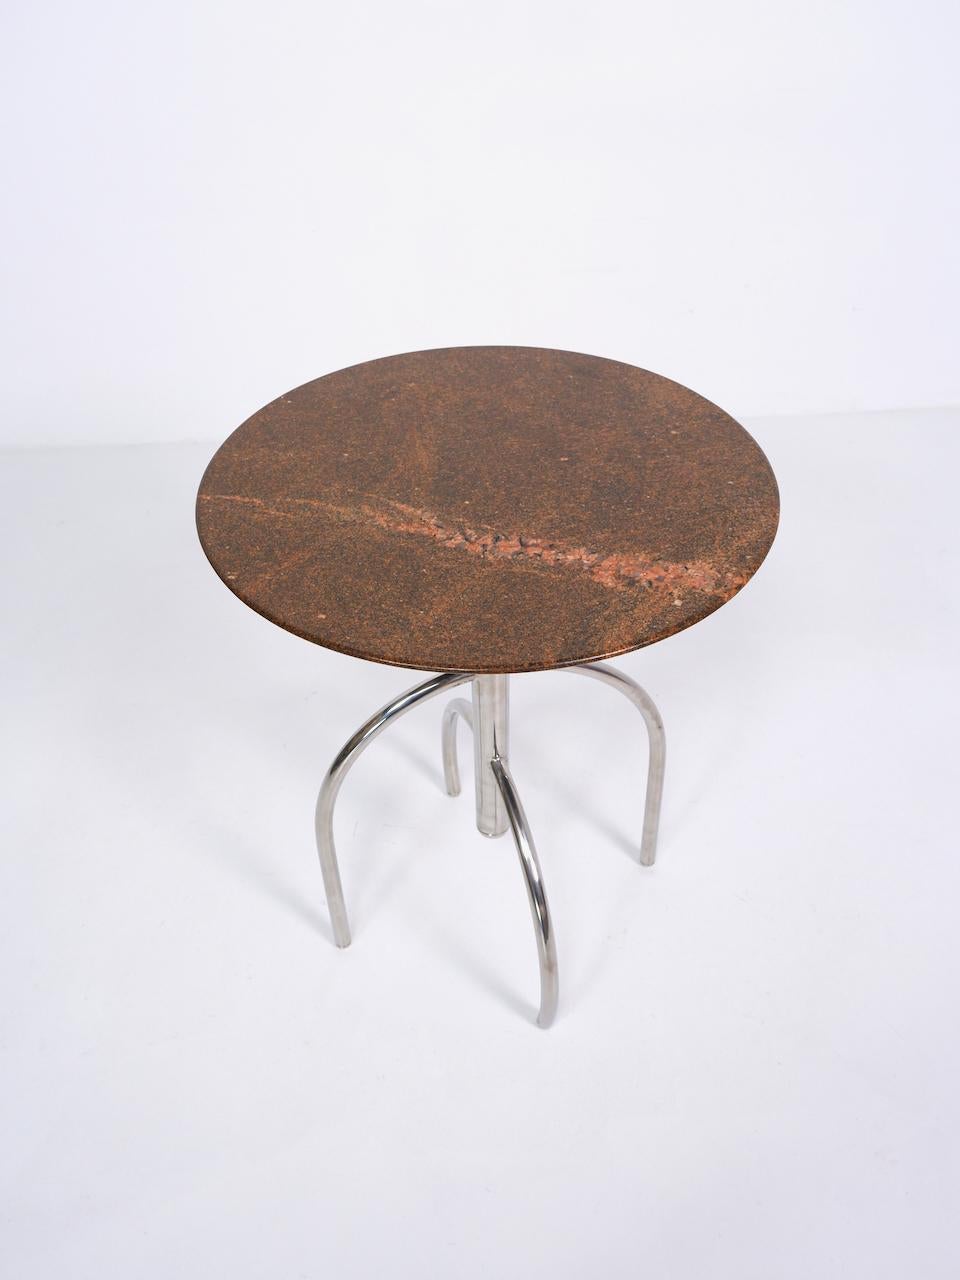 A late 20th century side table composed from a sculptural chrome plated tubular steel frame and granite top. 

Dimensions (cm, approx):
height: 61
diameter: 50.
 